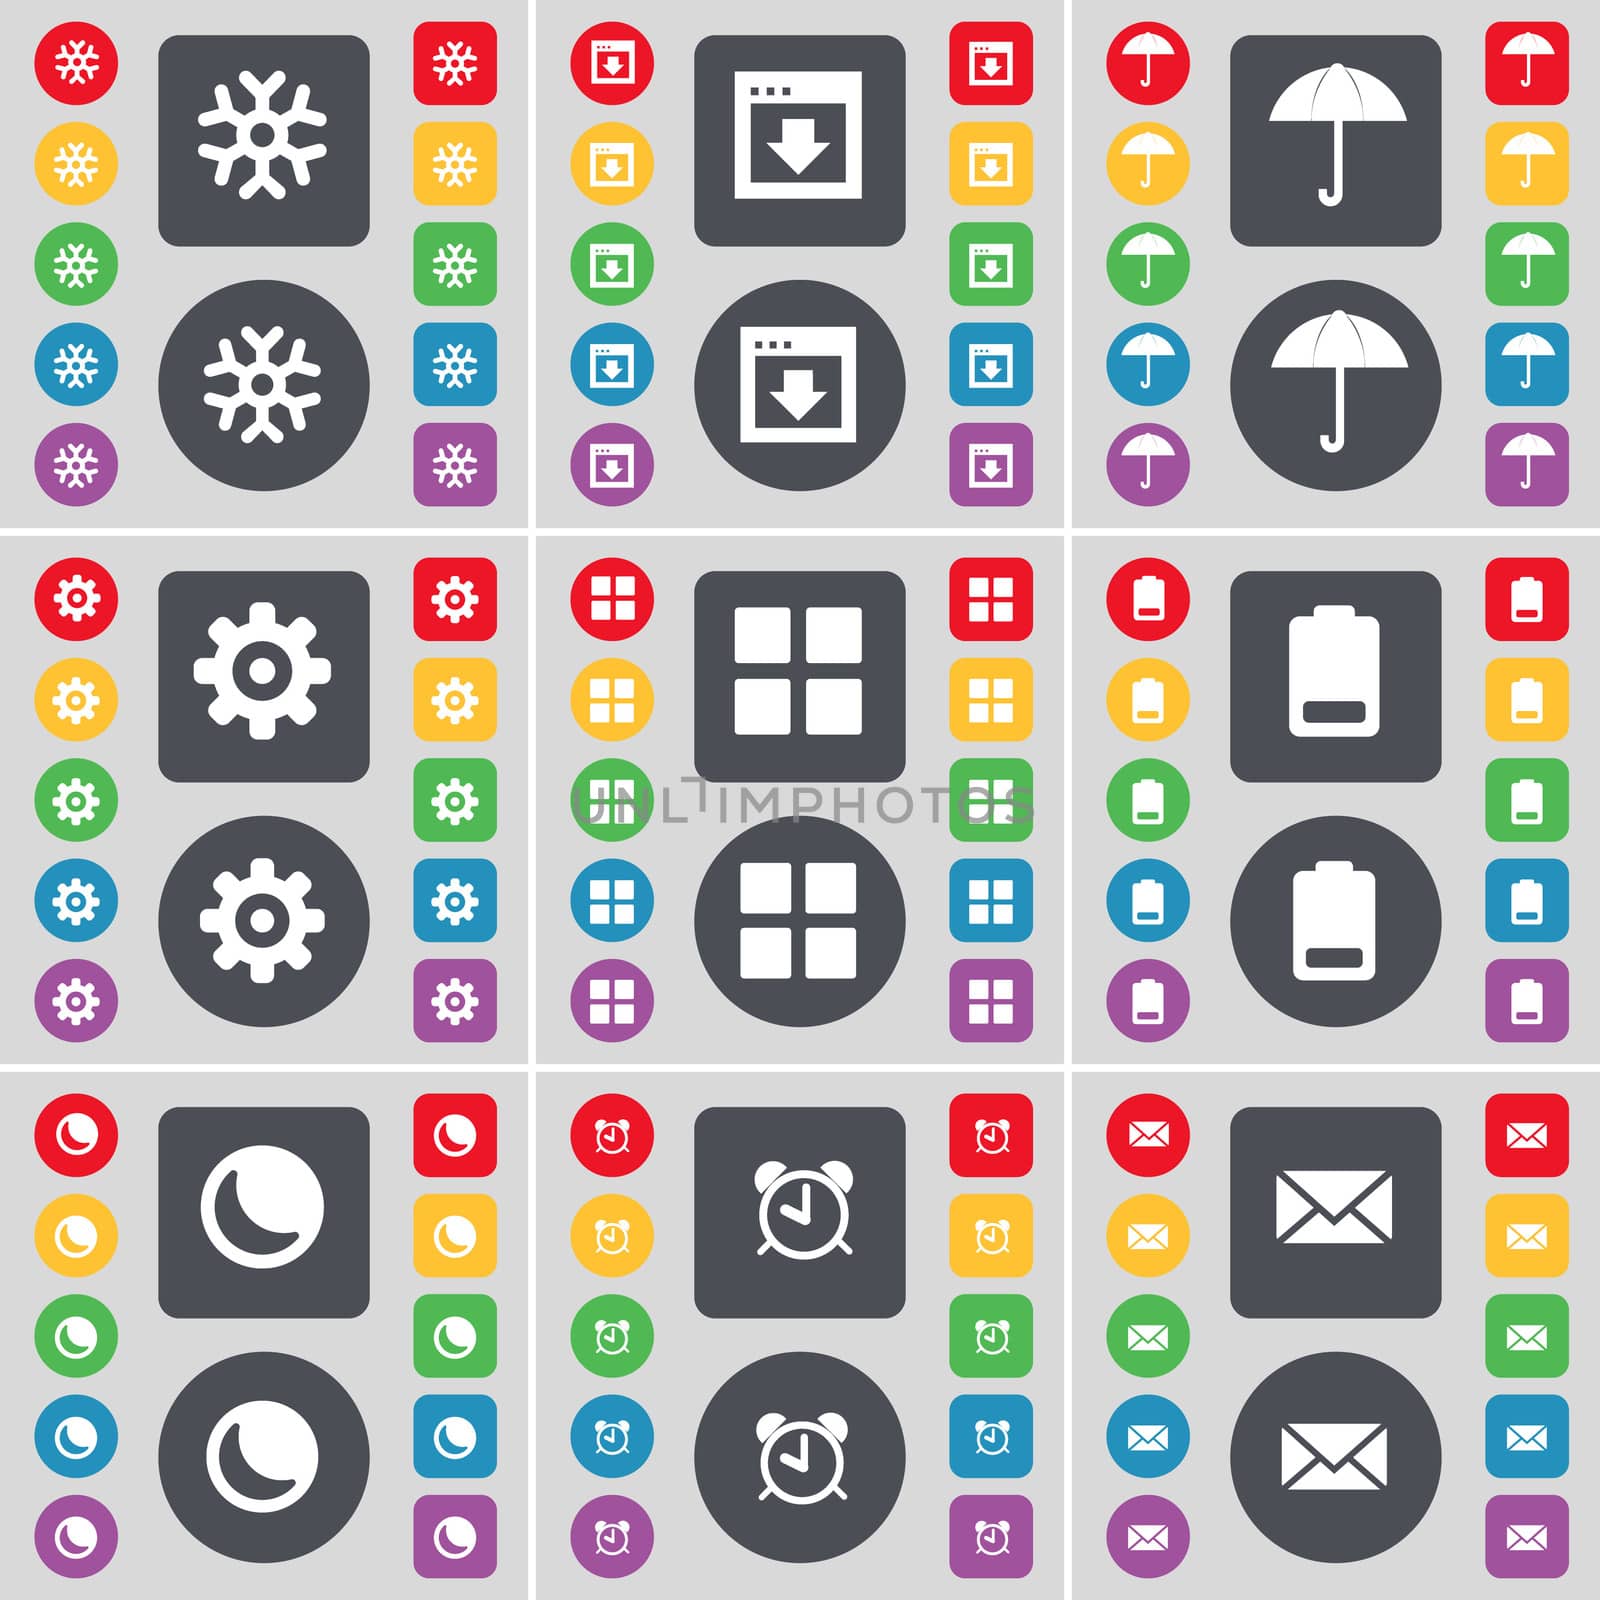 Snowflake, Window, Umbrella, Gear, Apps, Battery, Moon, Alarm clock, Message icon symbol. A large set of flat, colored buttons for your design.  by serhii_lohvyniuk